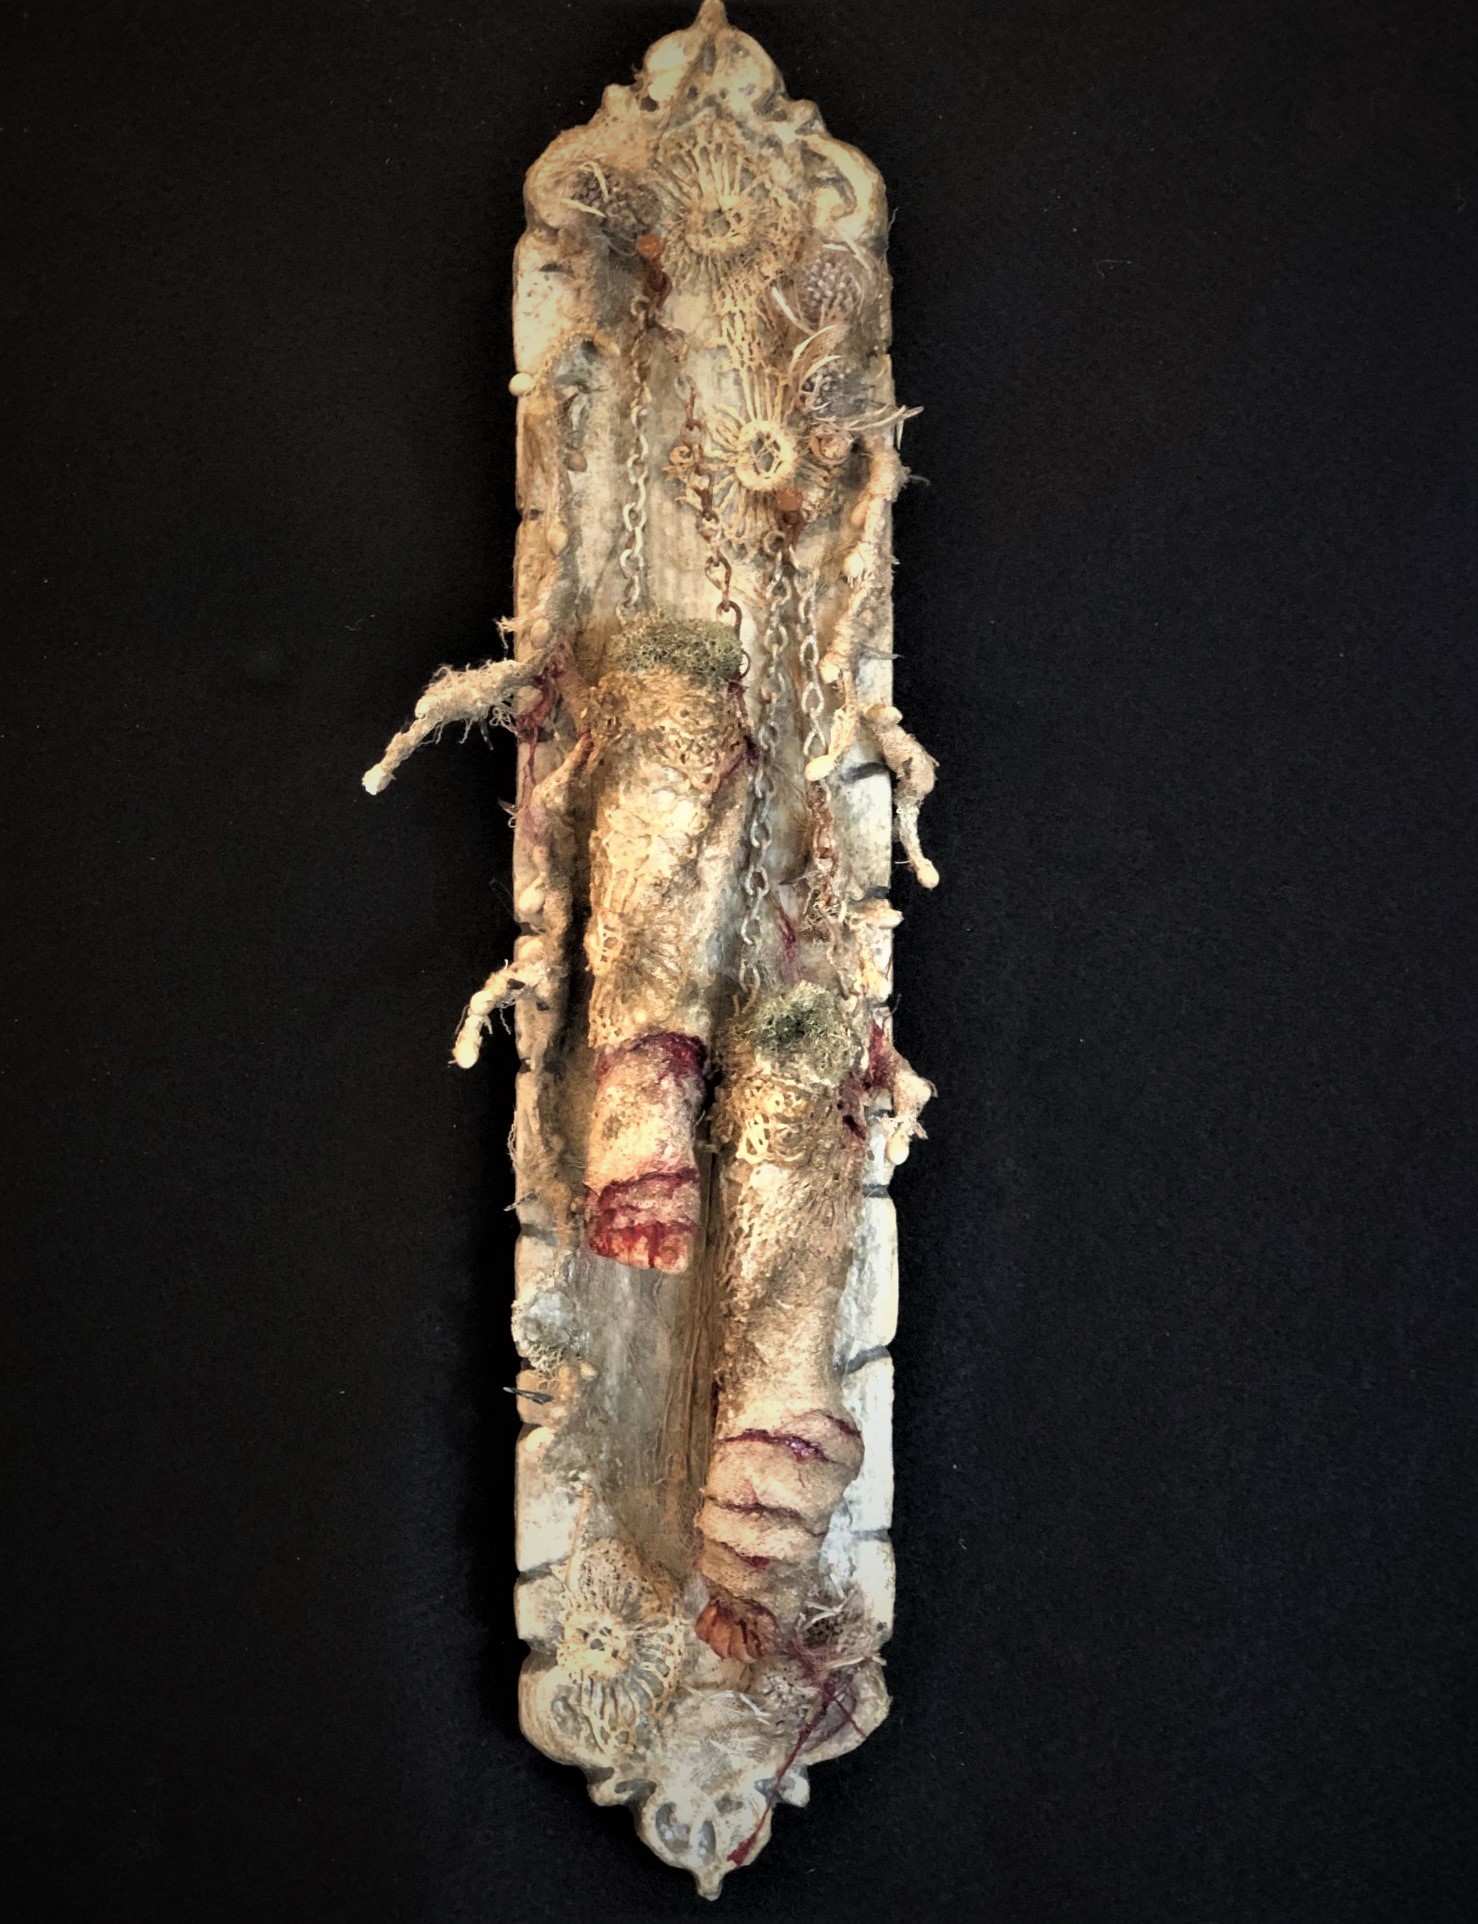 mixed media assemblage on board with severed feet held up by chain and hanging from nails